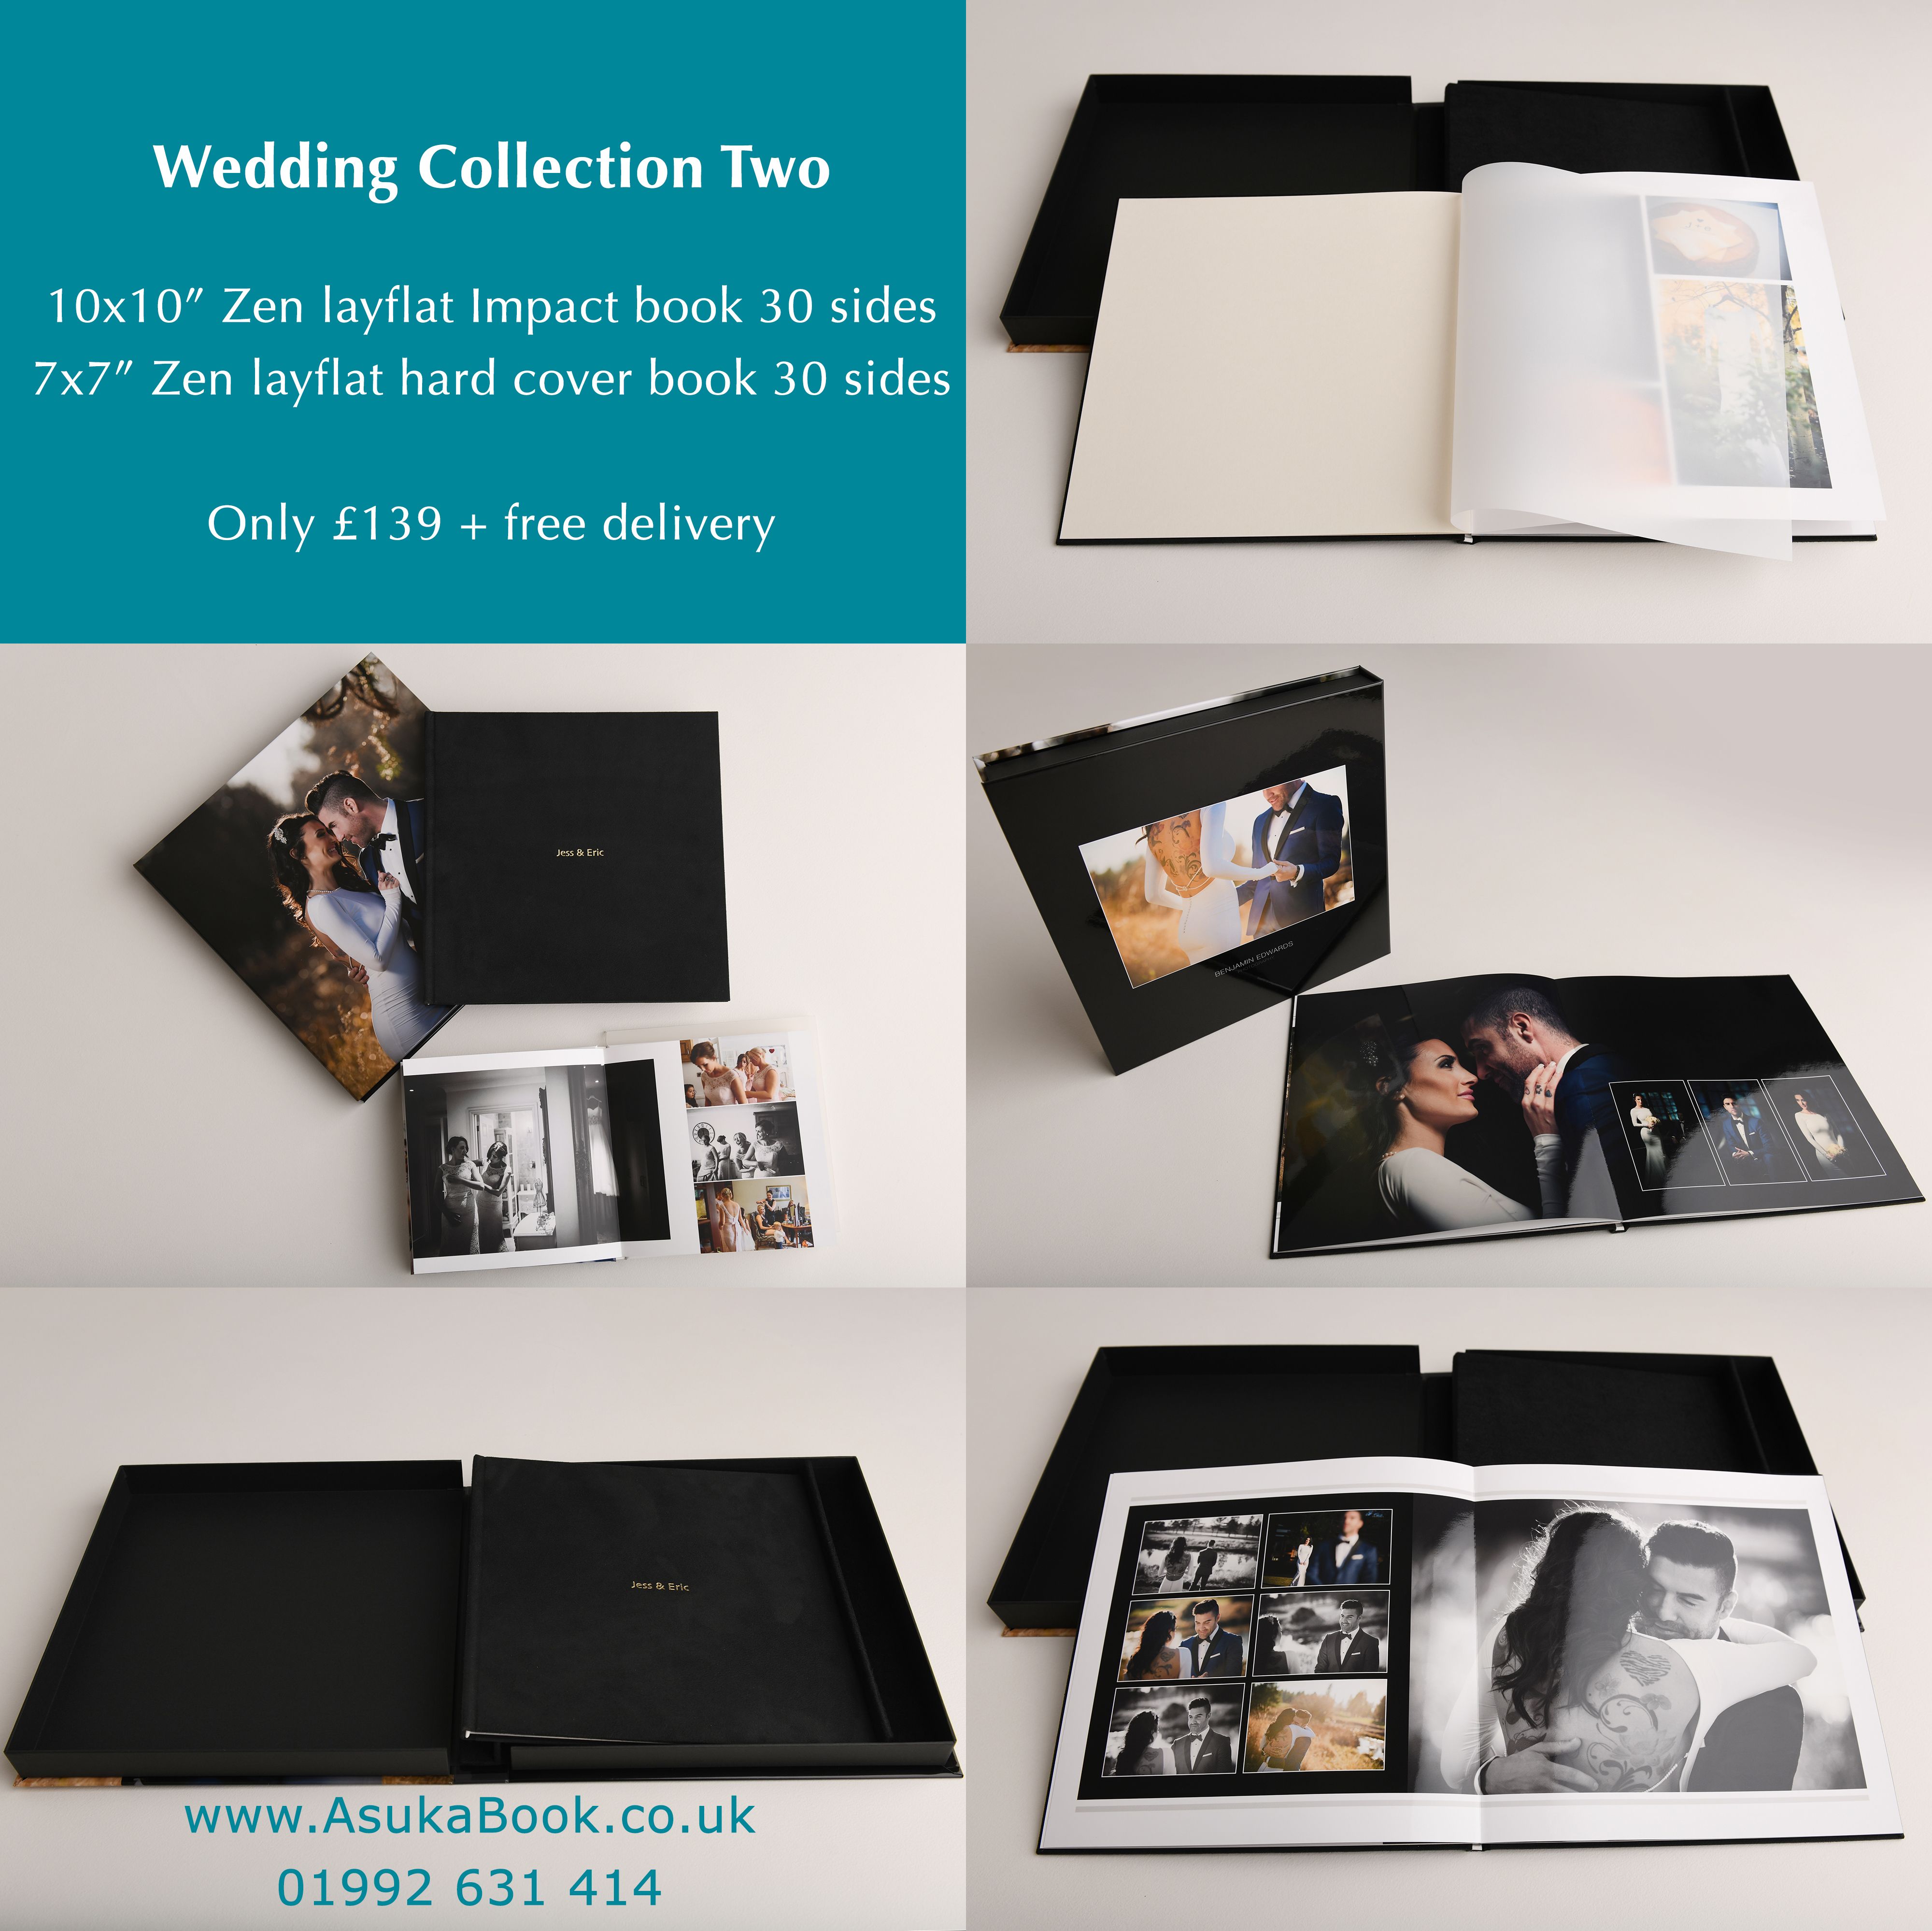 Wedding Collection Two